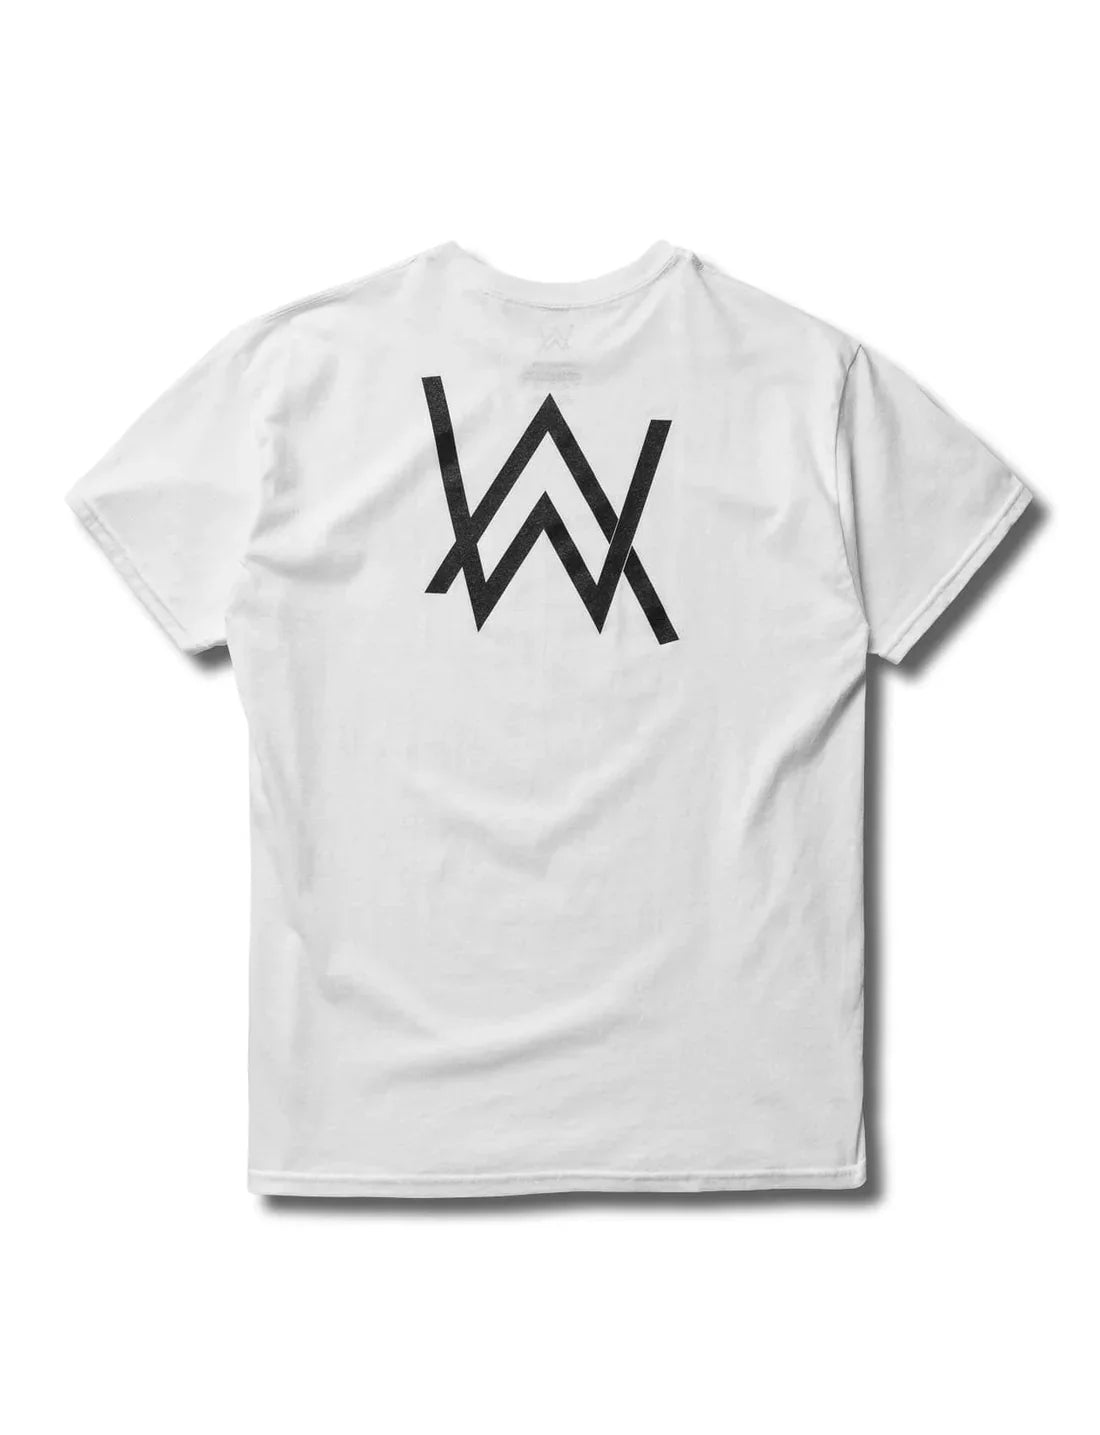 Back view of a white t-shirt with a bold black Walker logo, part of Alan Walker's signature apparel collection.